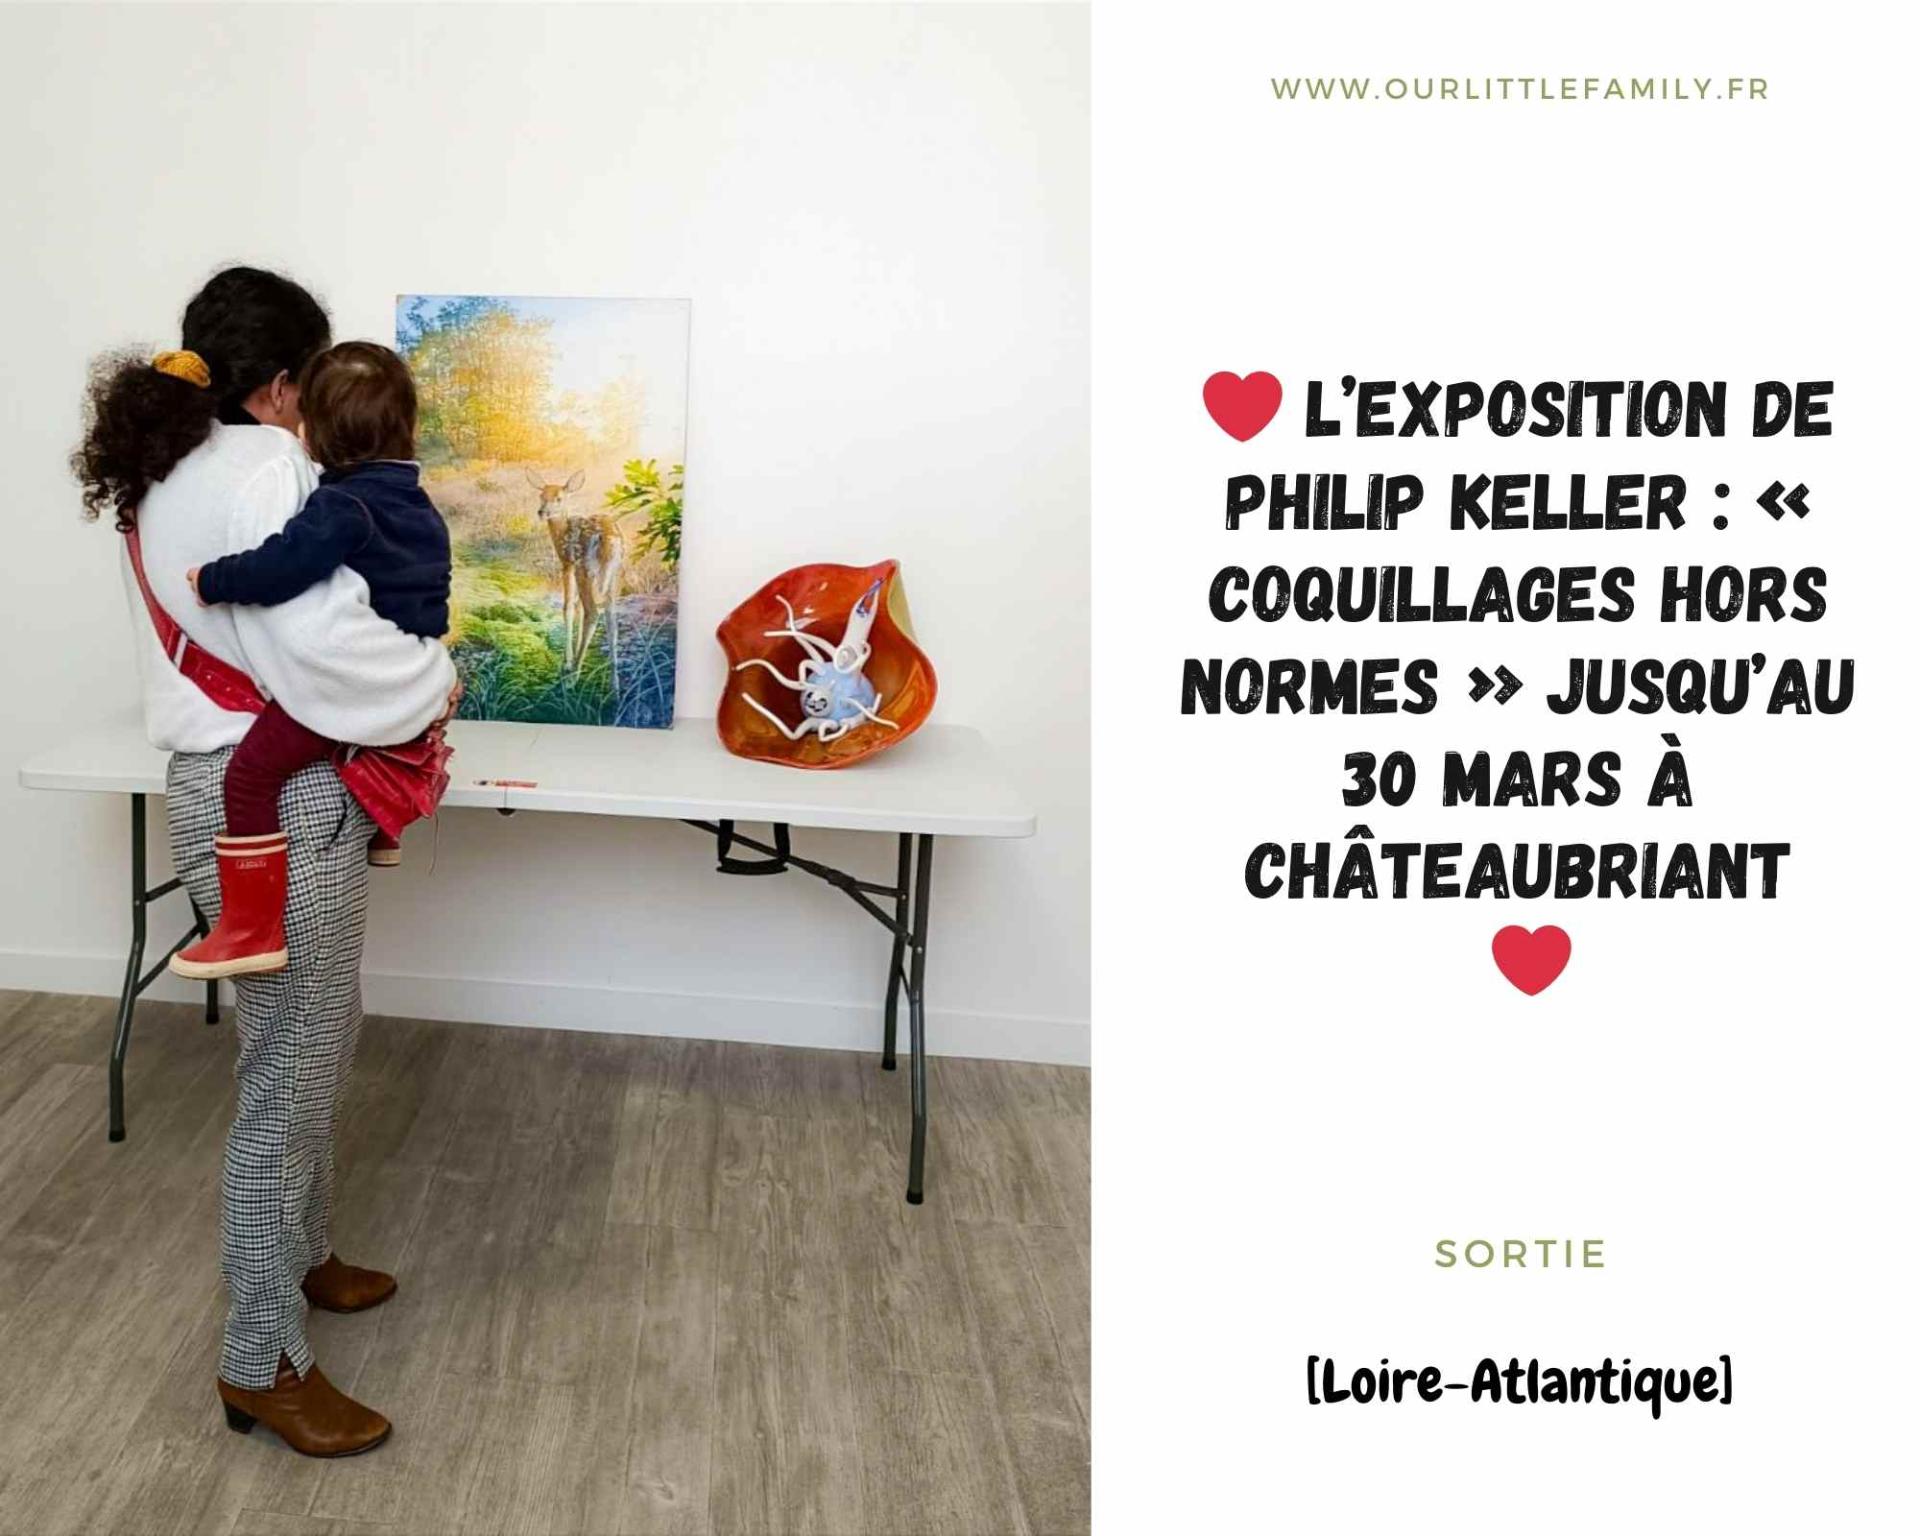 Exposition philip keller coquillages hors normes